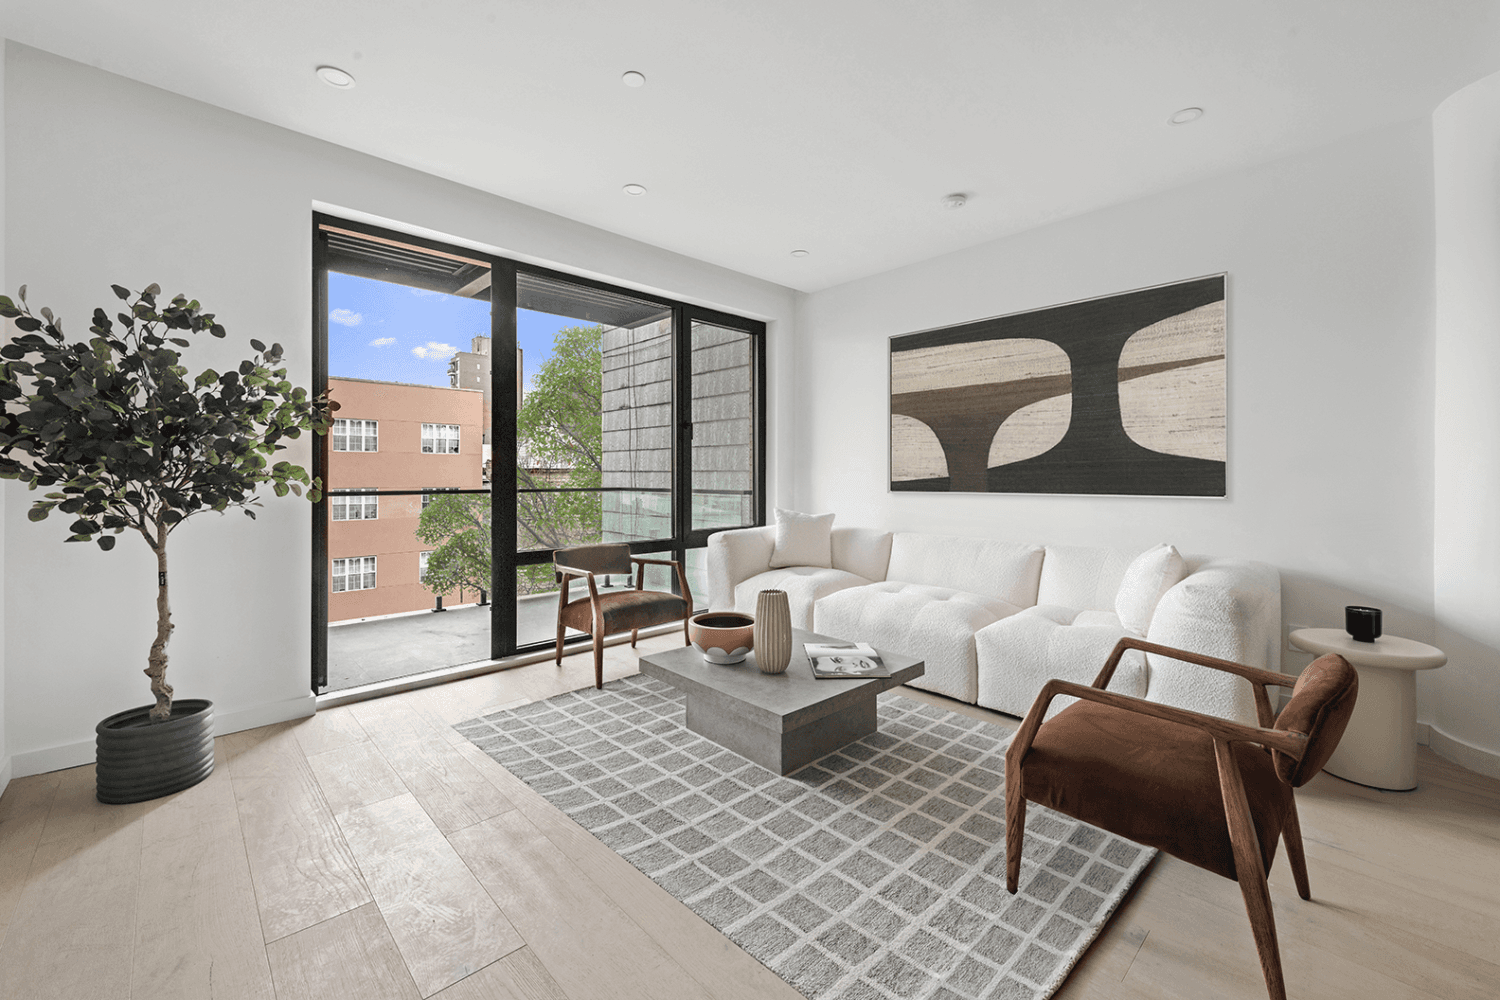 Welcome to 181 Jackson, a luxury, new development in one of Brooklyn's most vibrant and sought after neighborhoods.